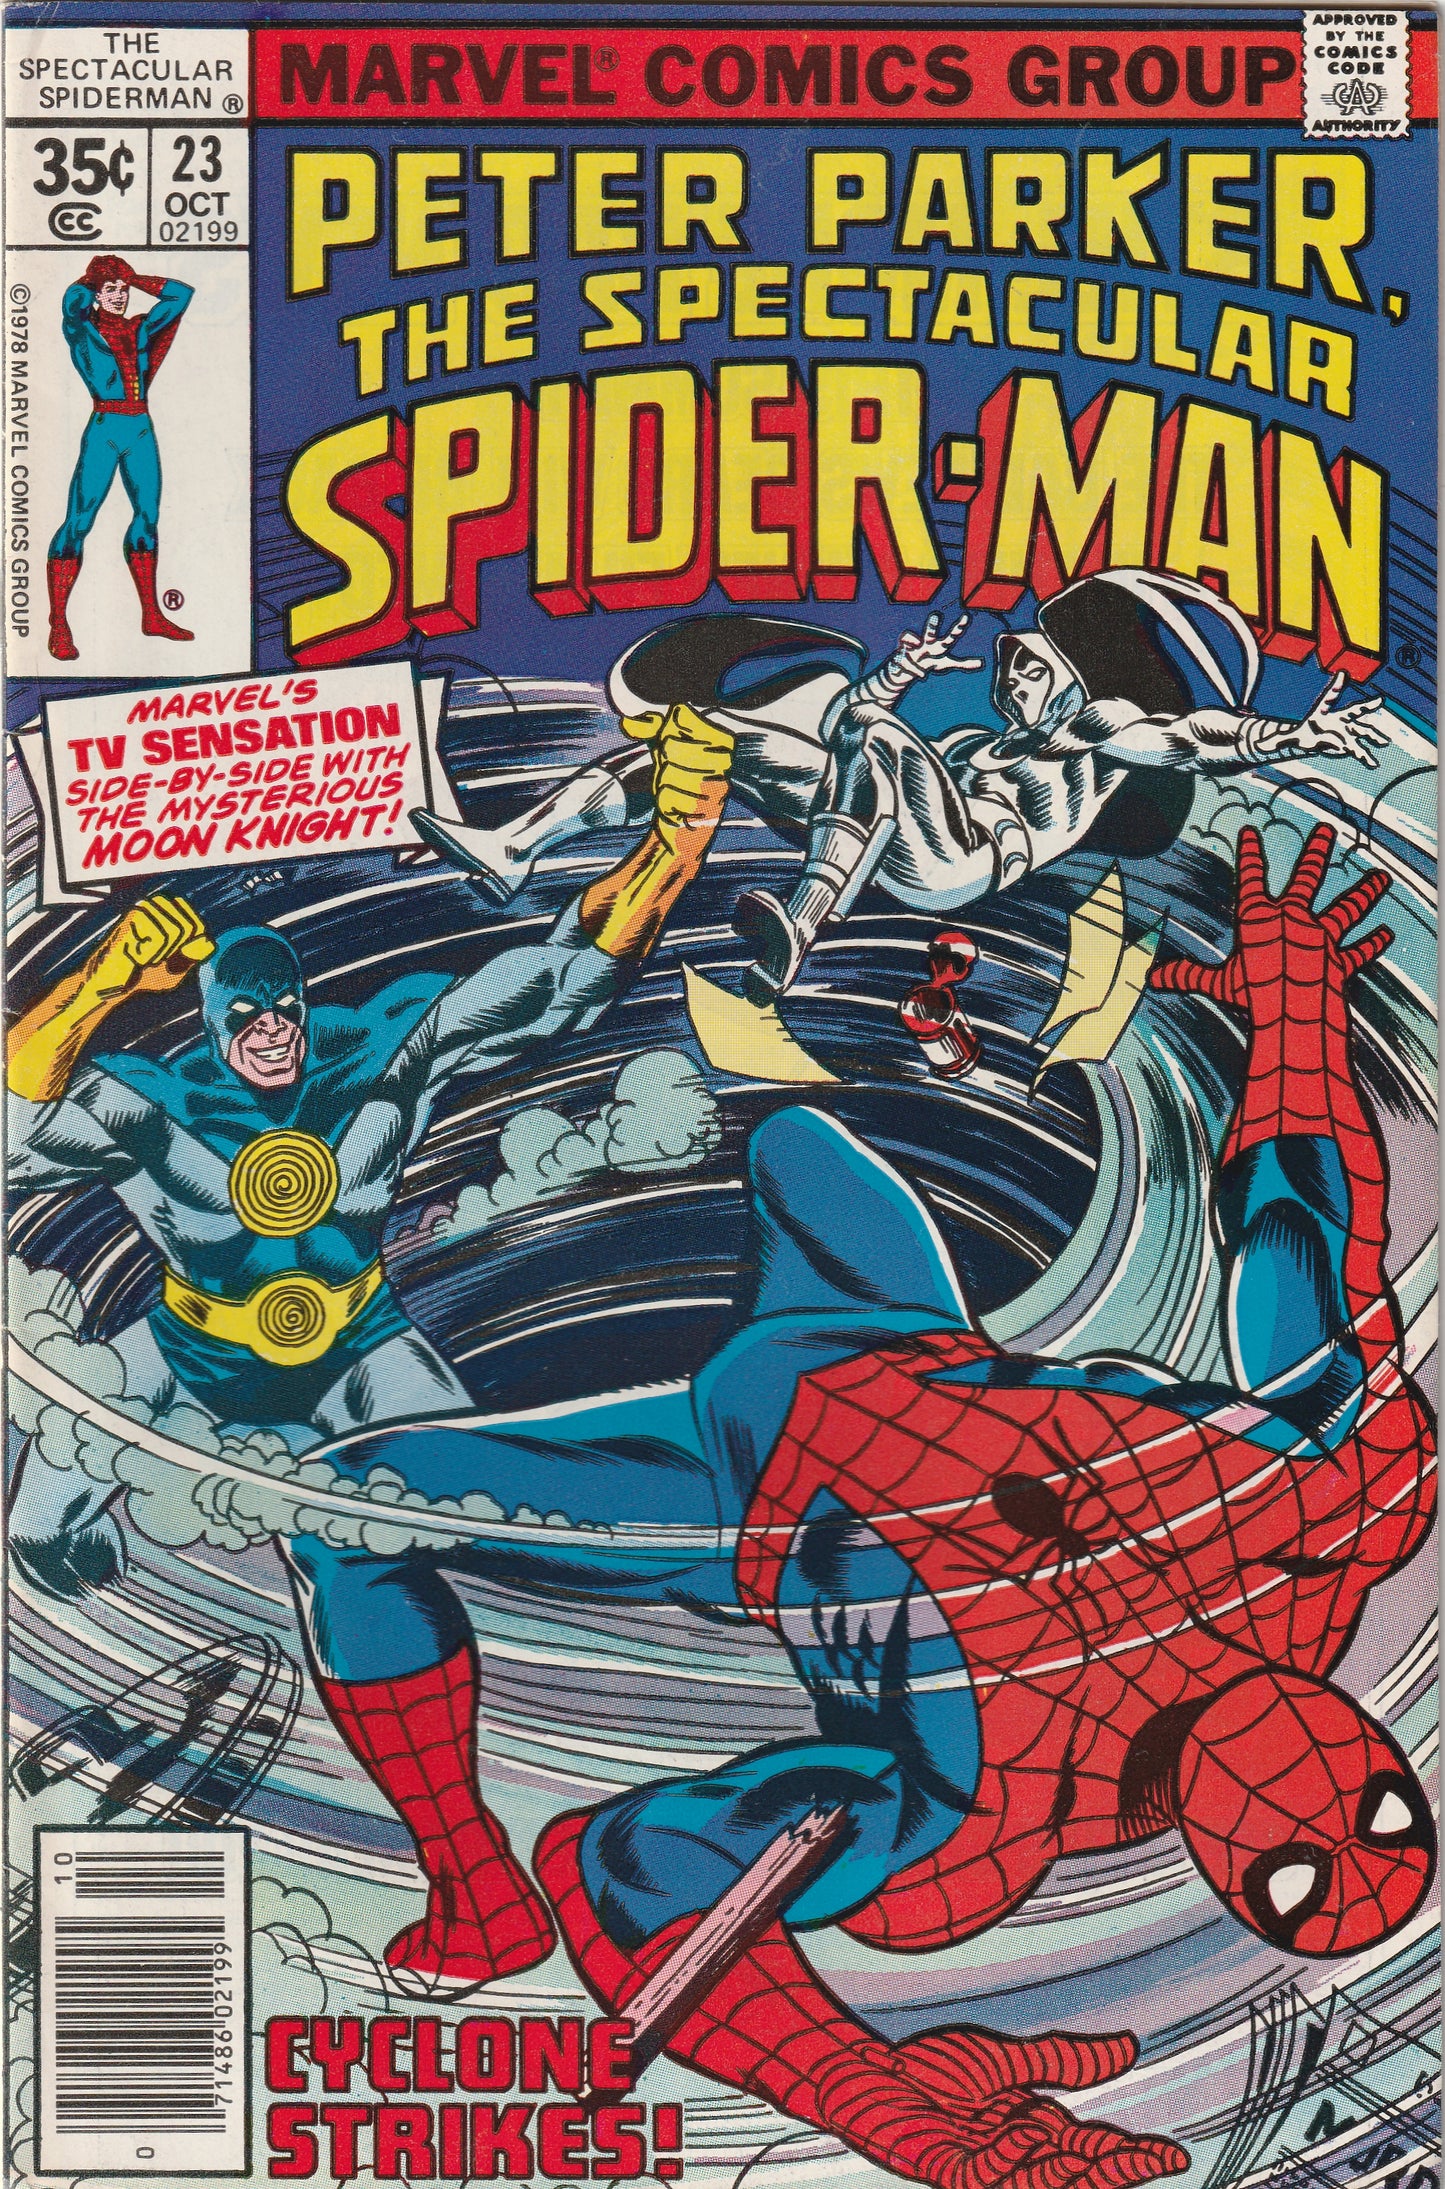 Spectacular Spider-Man #23 (1978) - 1st Team-up of Spider-Man and Moon Knight